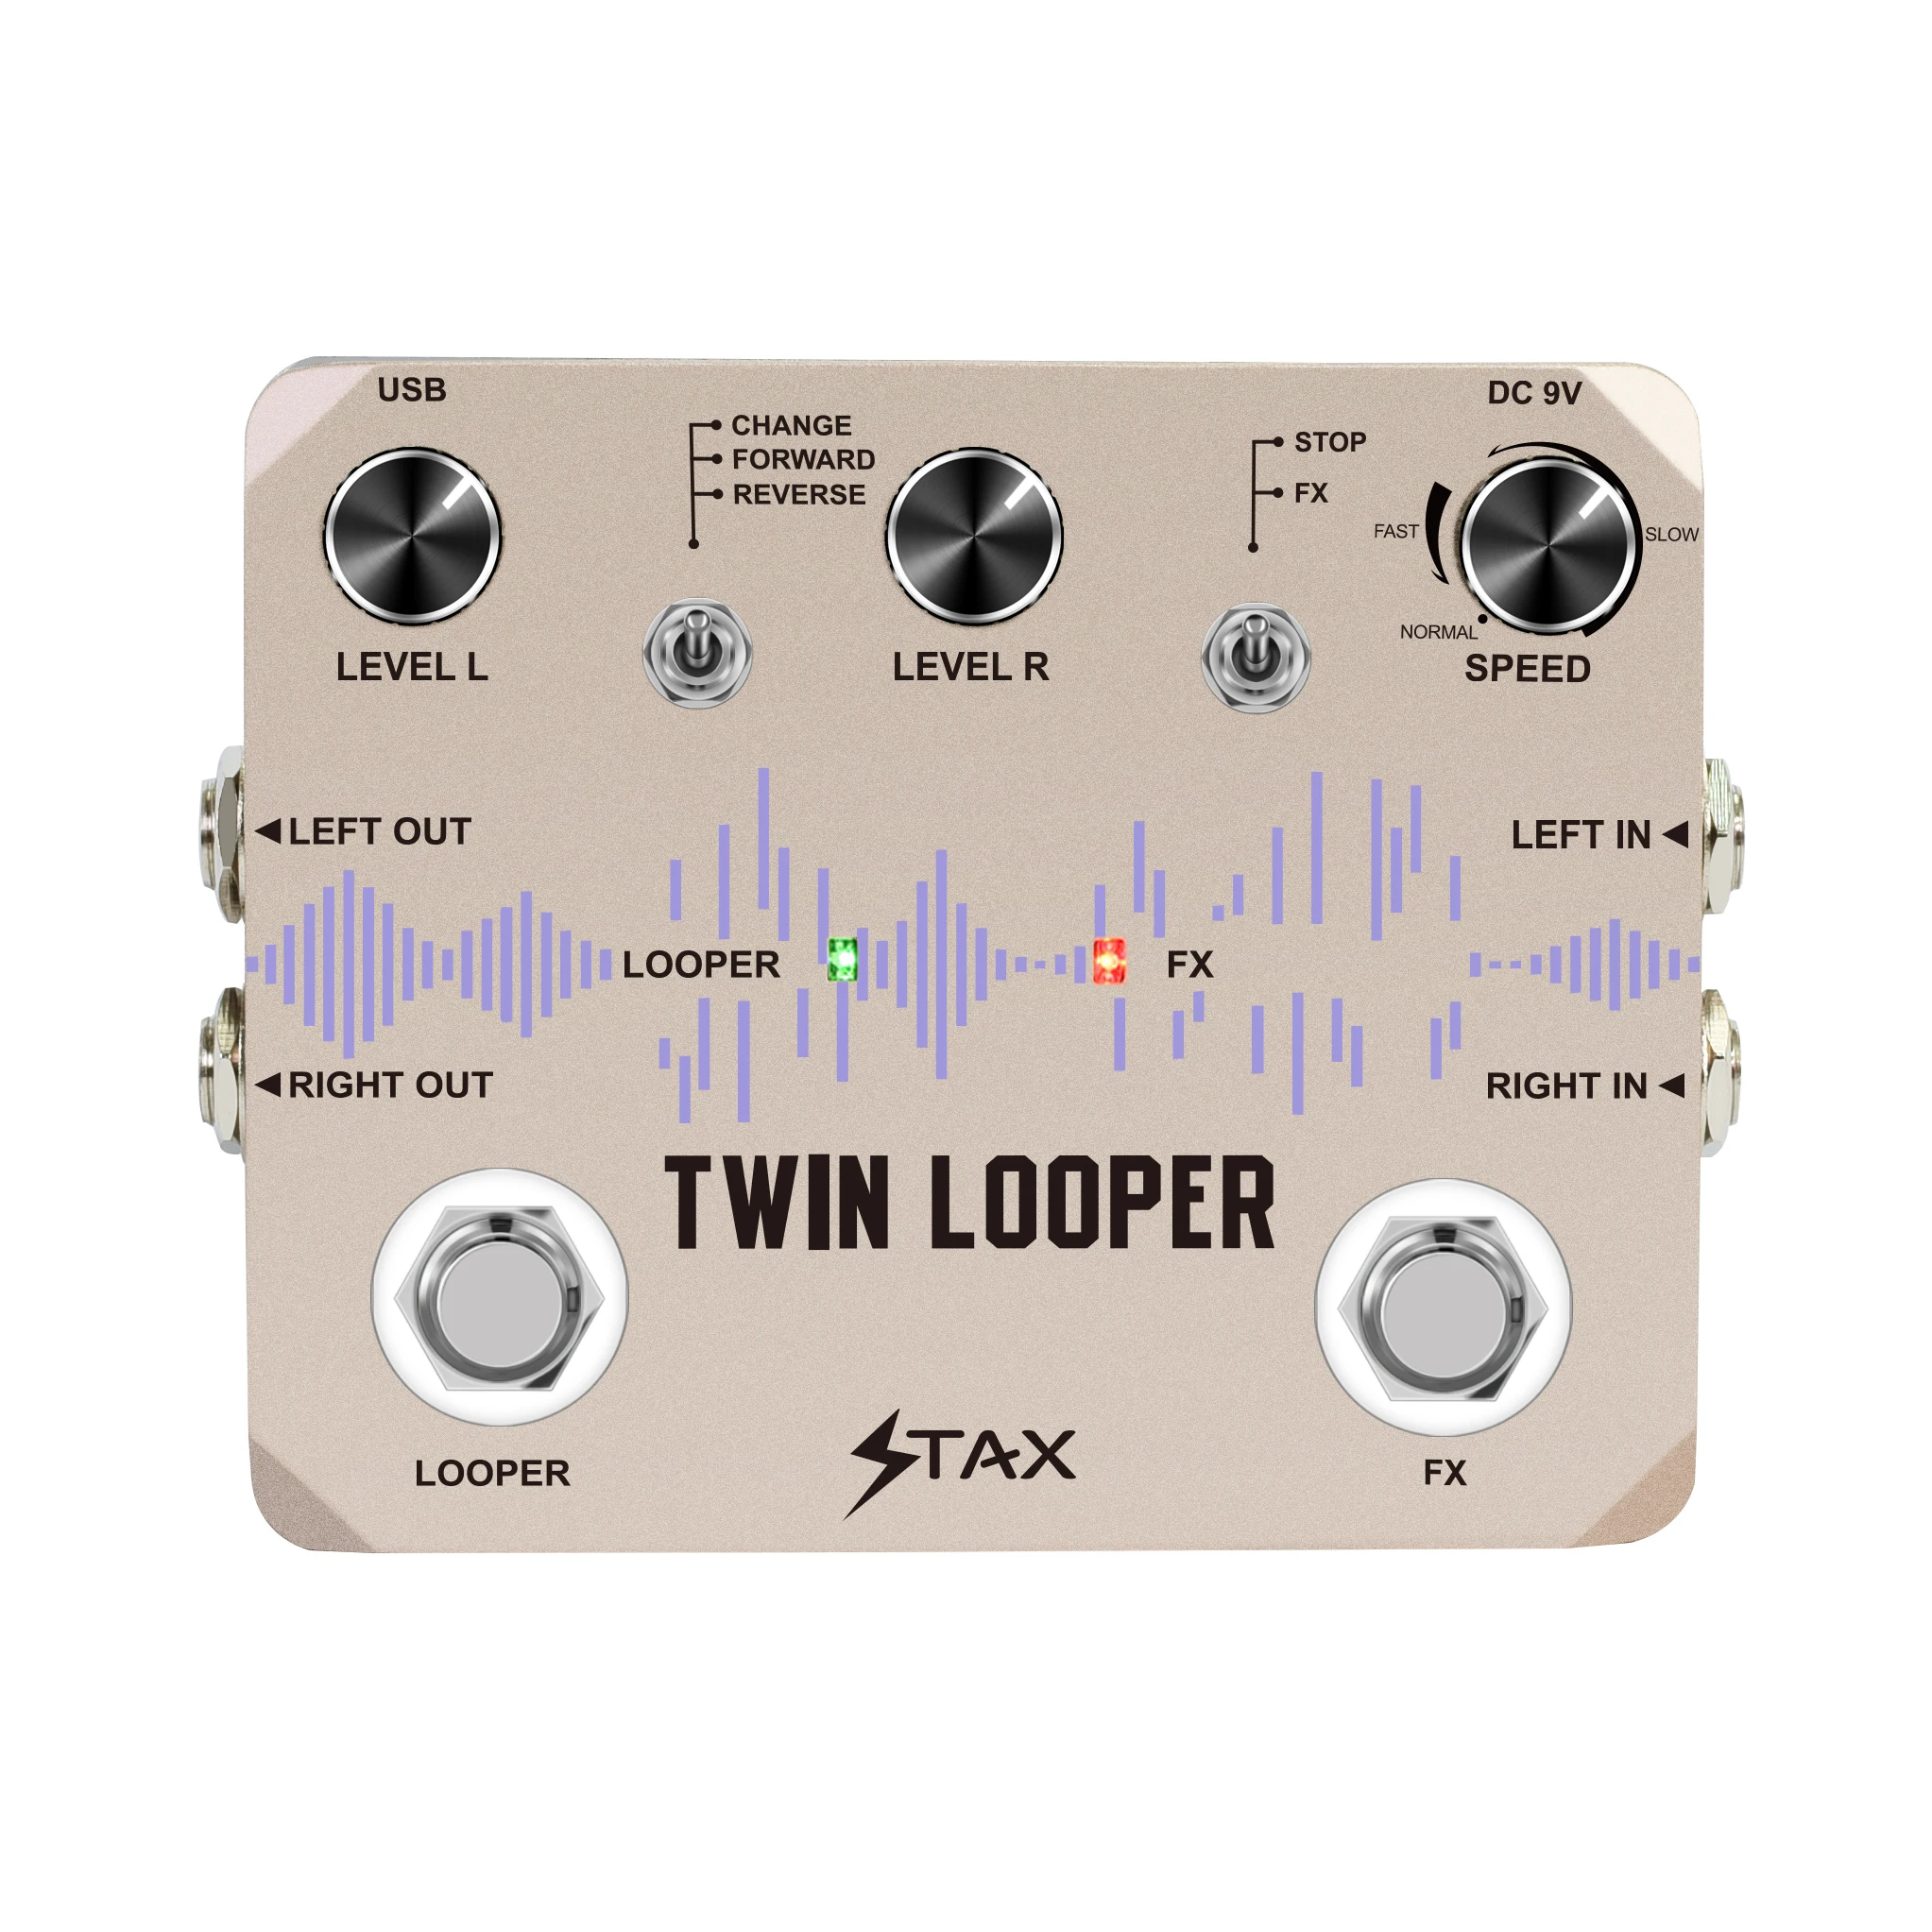 

Stax LTL-02 Twin Looper Pedal Upgrades Looper Pedals For Electric Guitar 10 Min Looping Unlimited Undo/Redo Function 11 Types